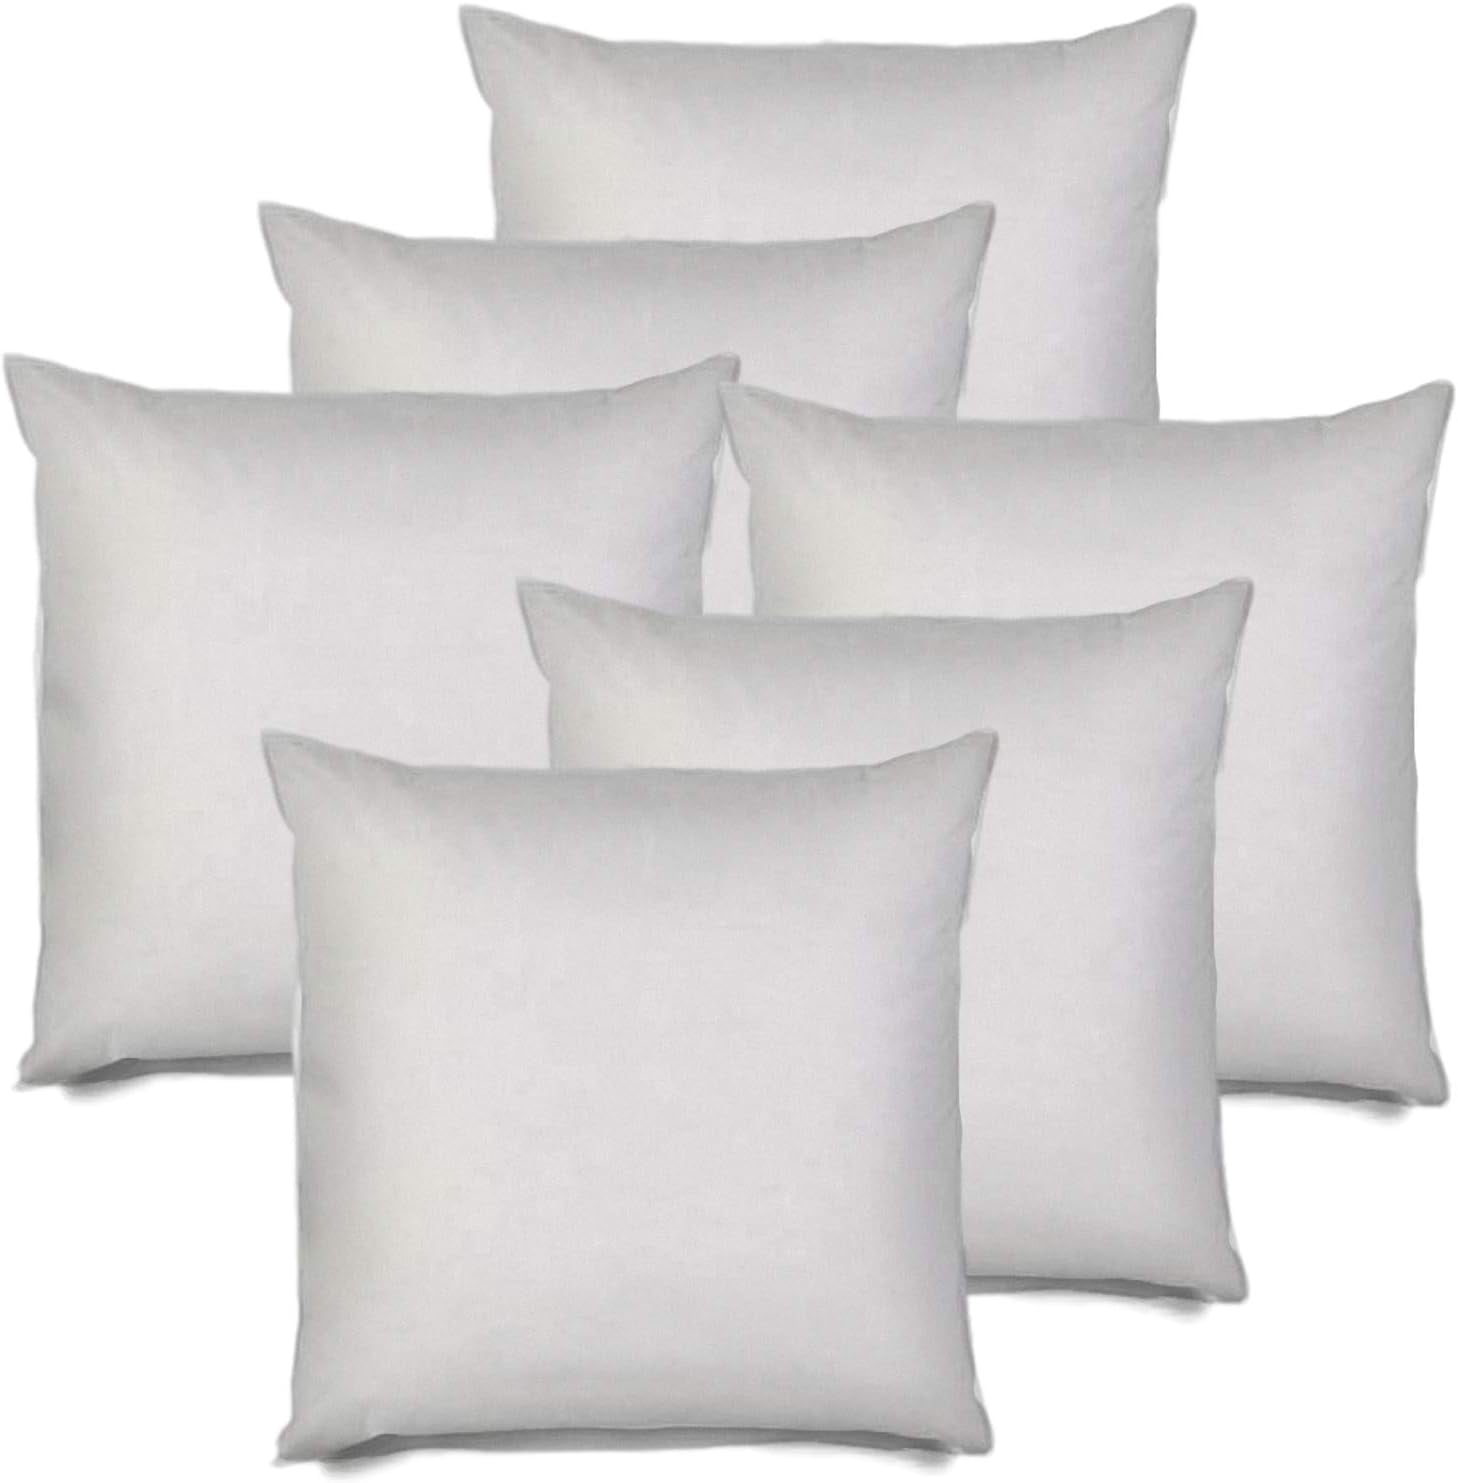 Pack of 4 Throw Pillows Insert Ultra Soft Bed & Couch Sofa Decor Utopia  Bedding